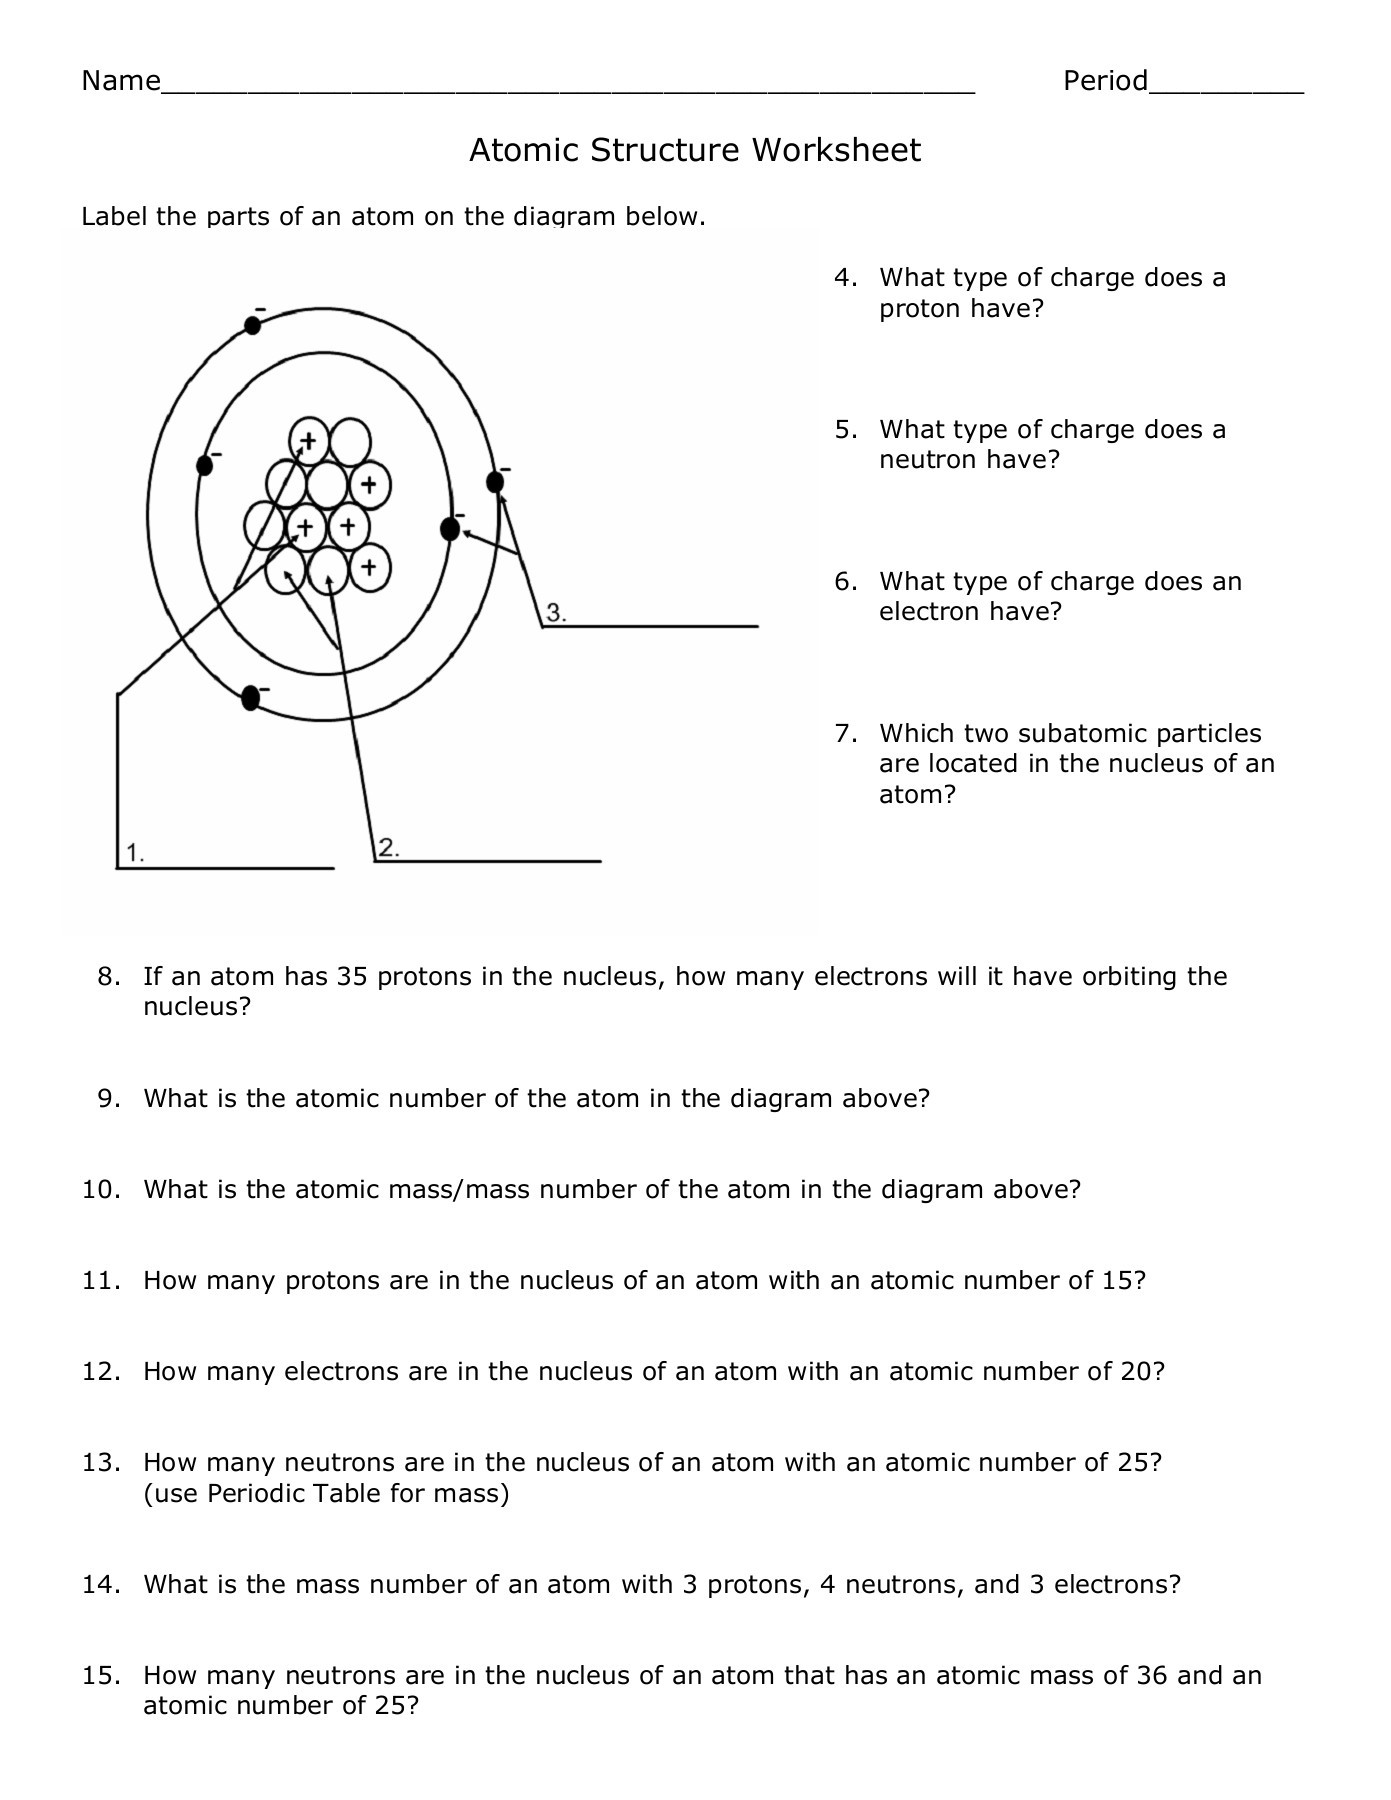 Atomic Structure Worksheet Pdf atomic Structure Worksheet Shelby County Schools Pages 1